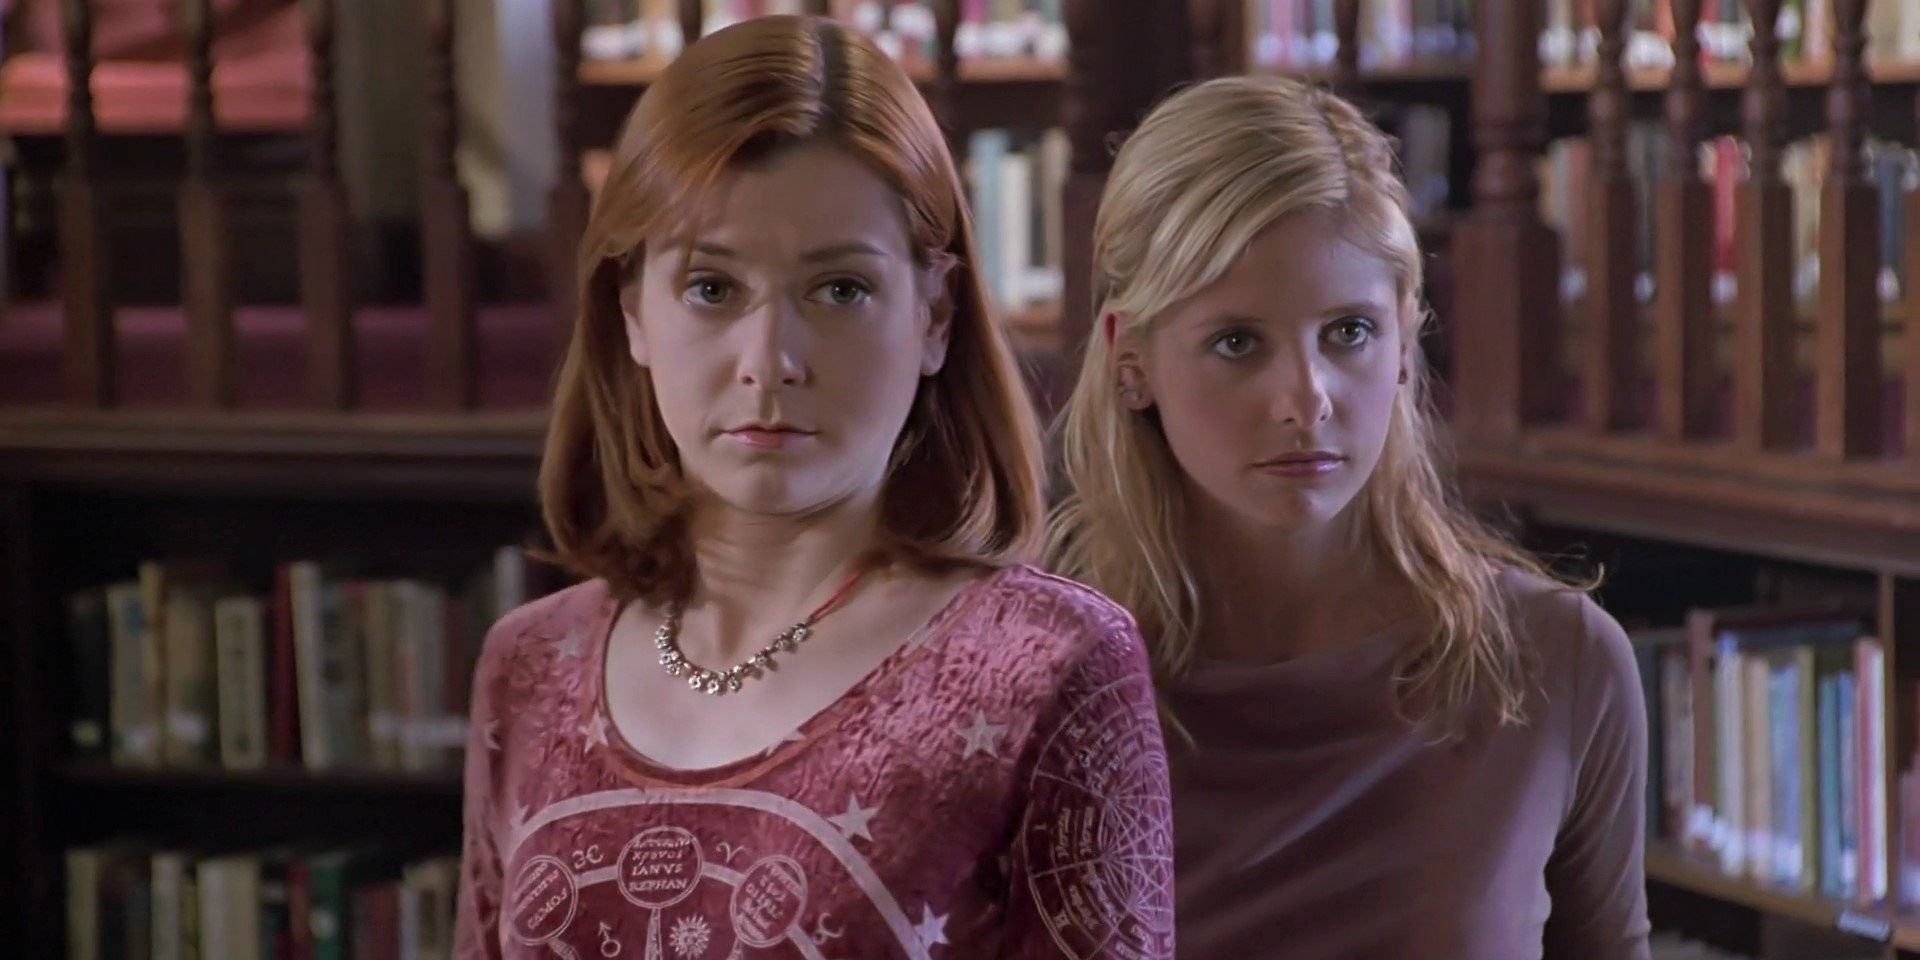 Willow and Buffy stand next to each other in the library in Buffy the Vampire Slayer